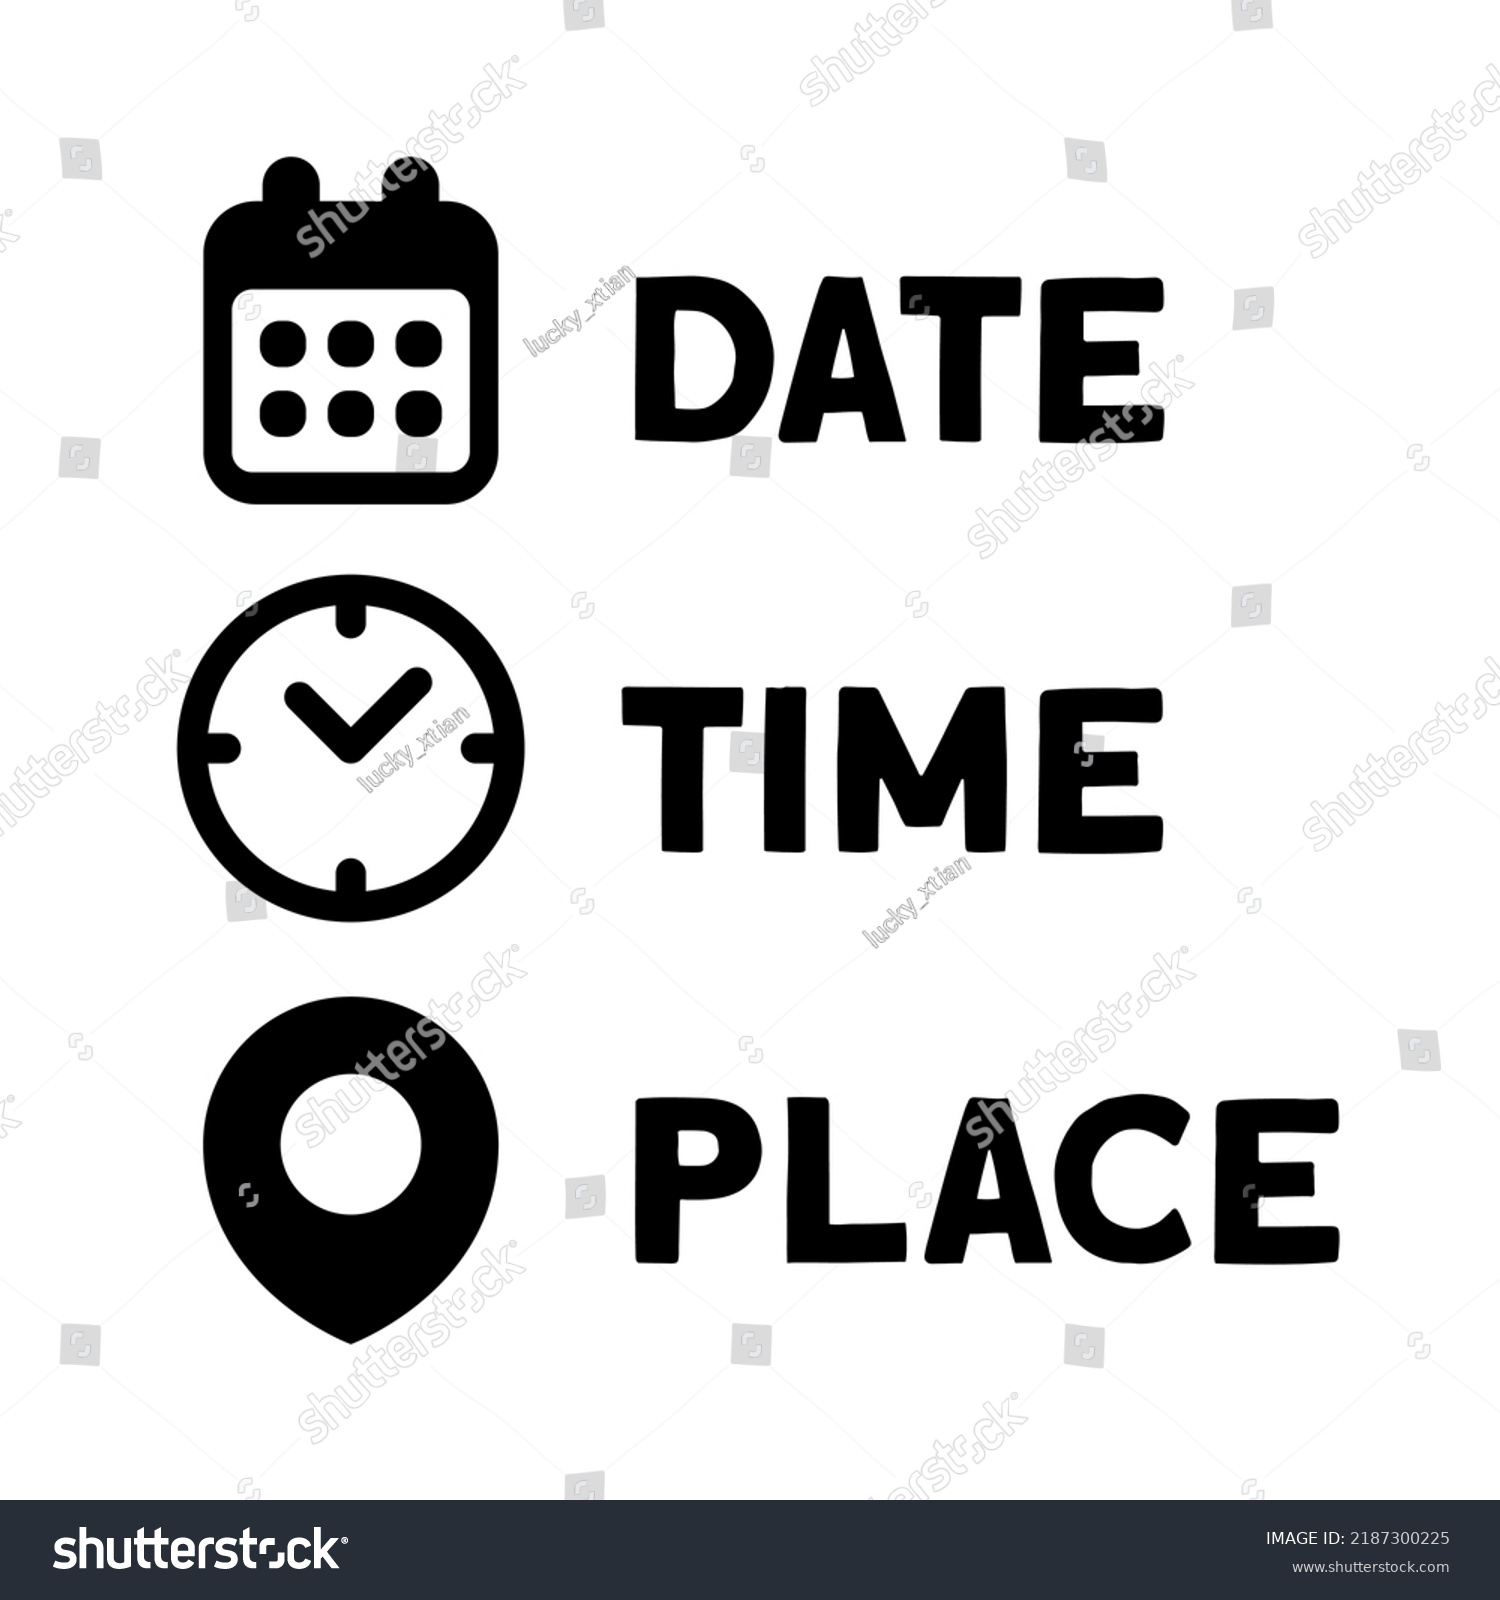 Date, Time, Address or Place Icons Symbol #2187300225